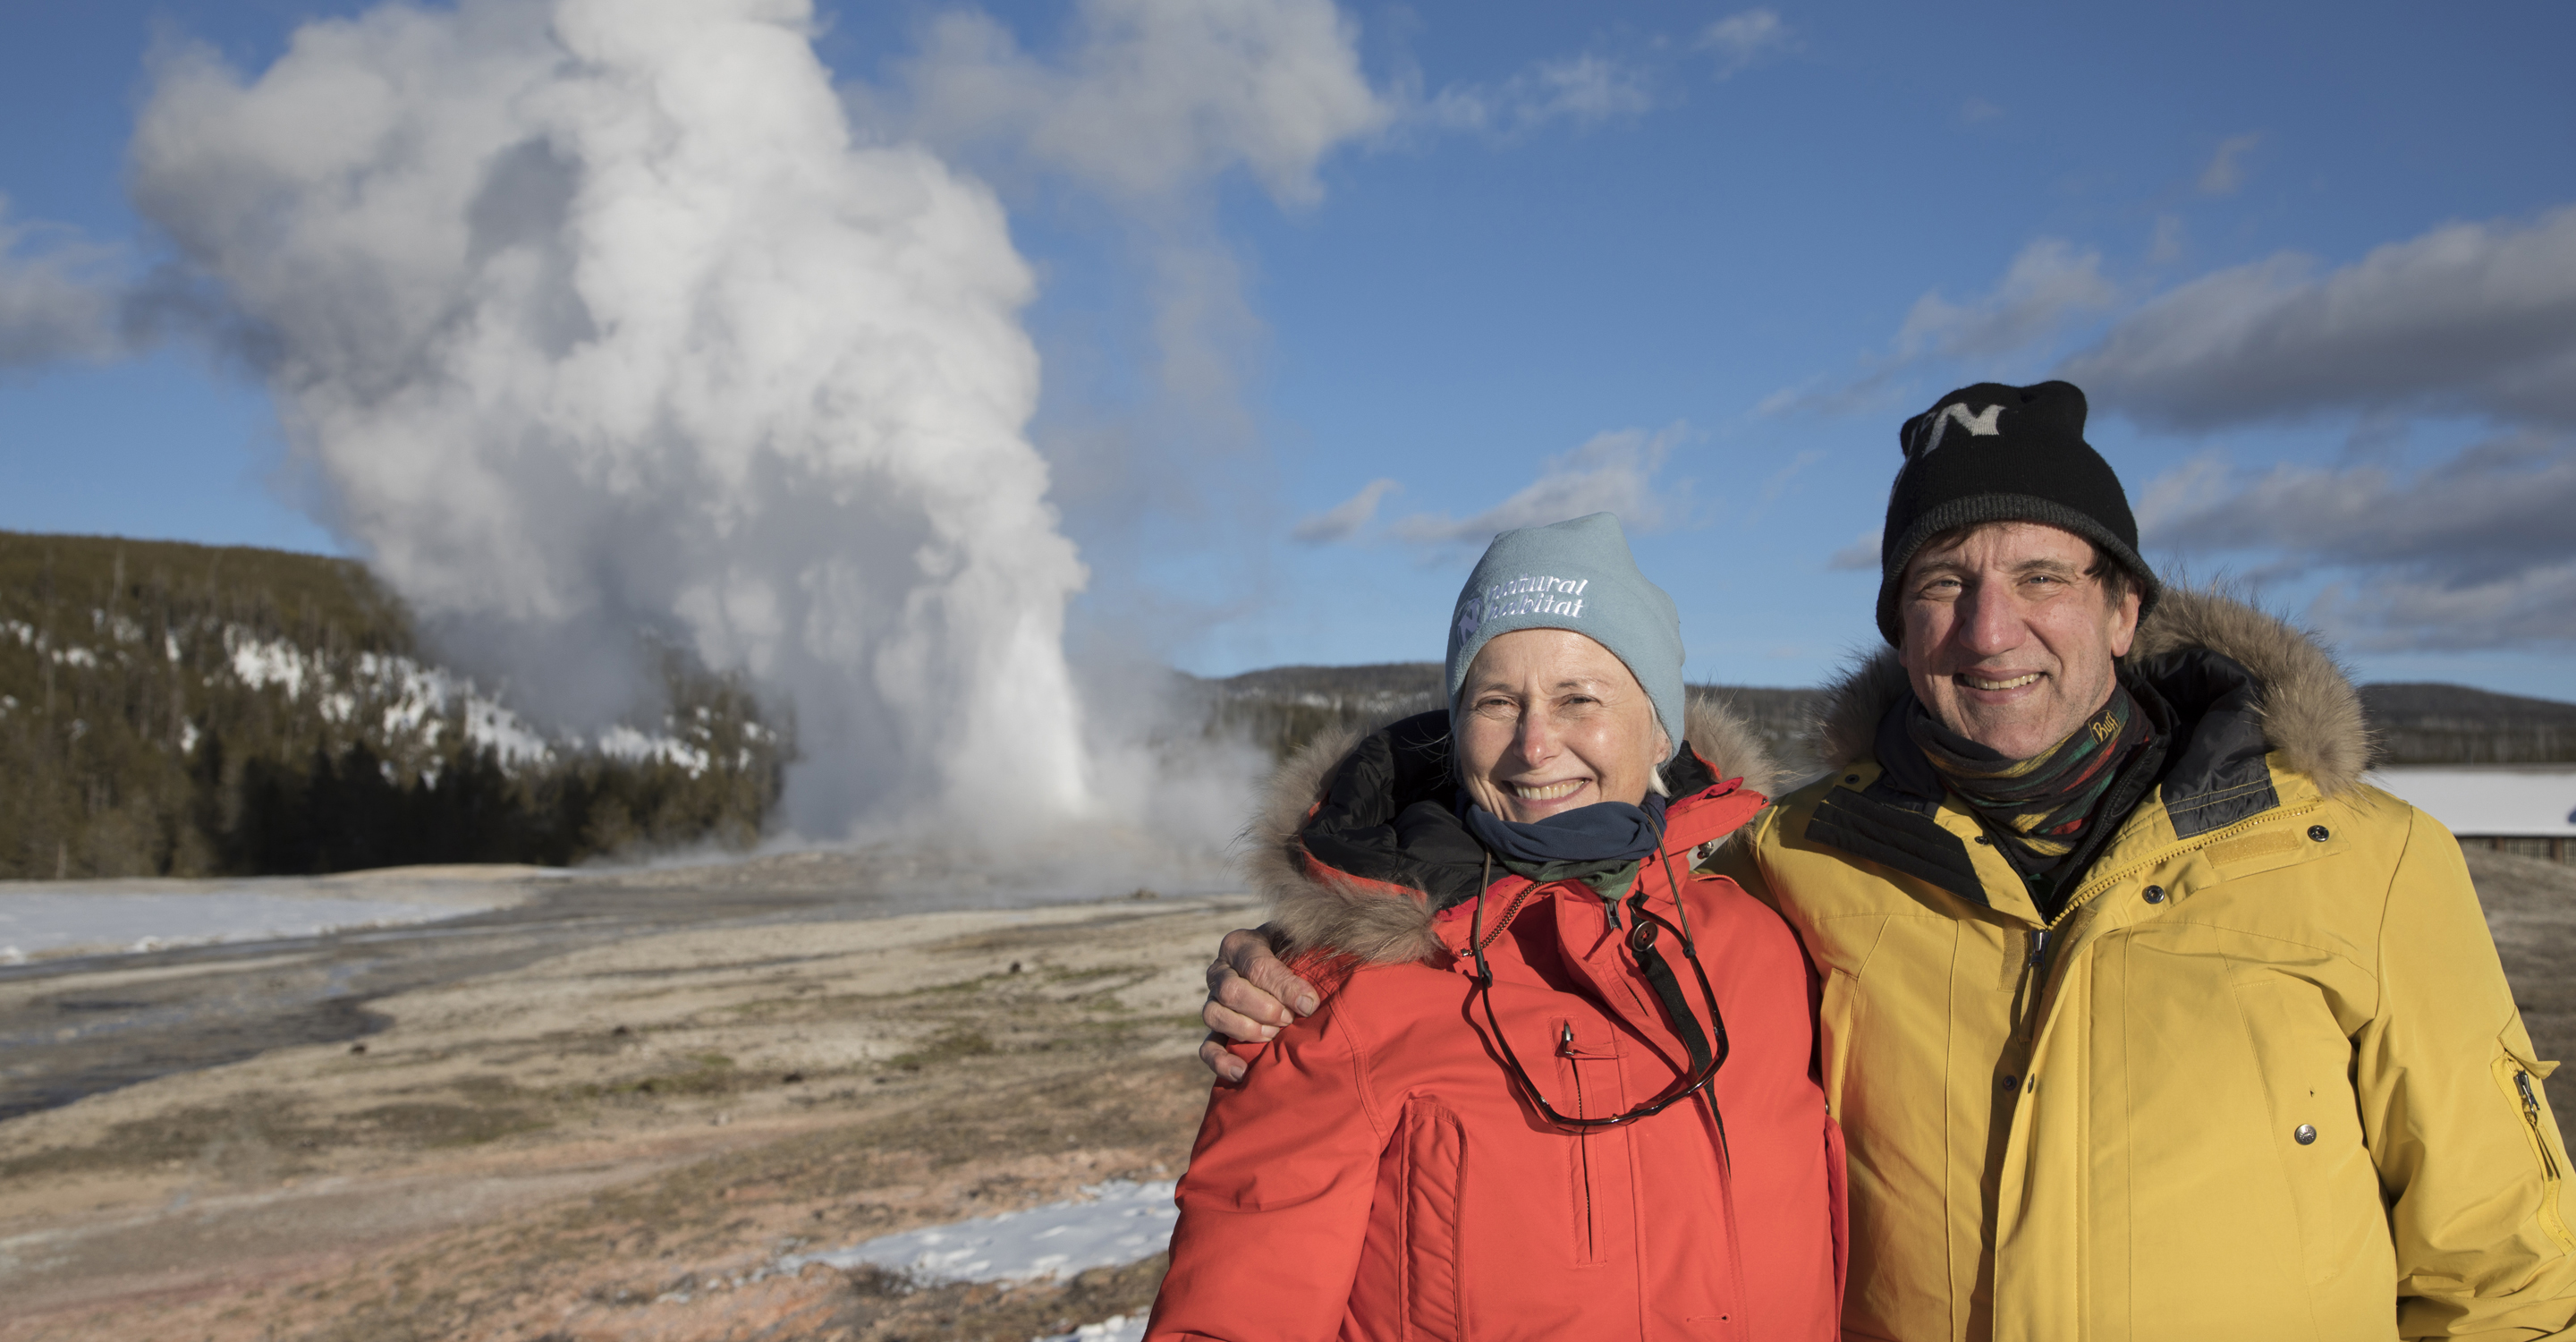 Happy travelers standing in front of a geyser in Yellowstone National Park, United States